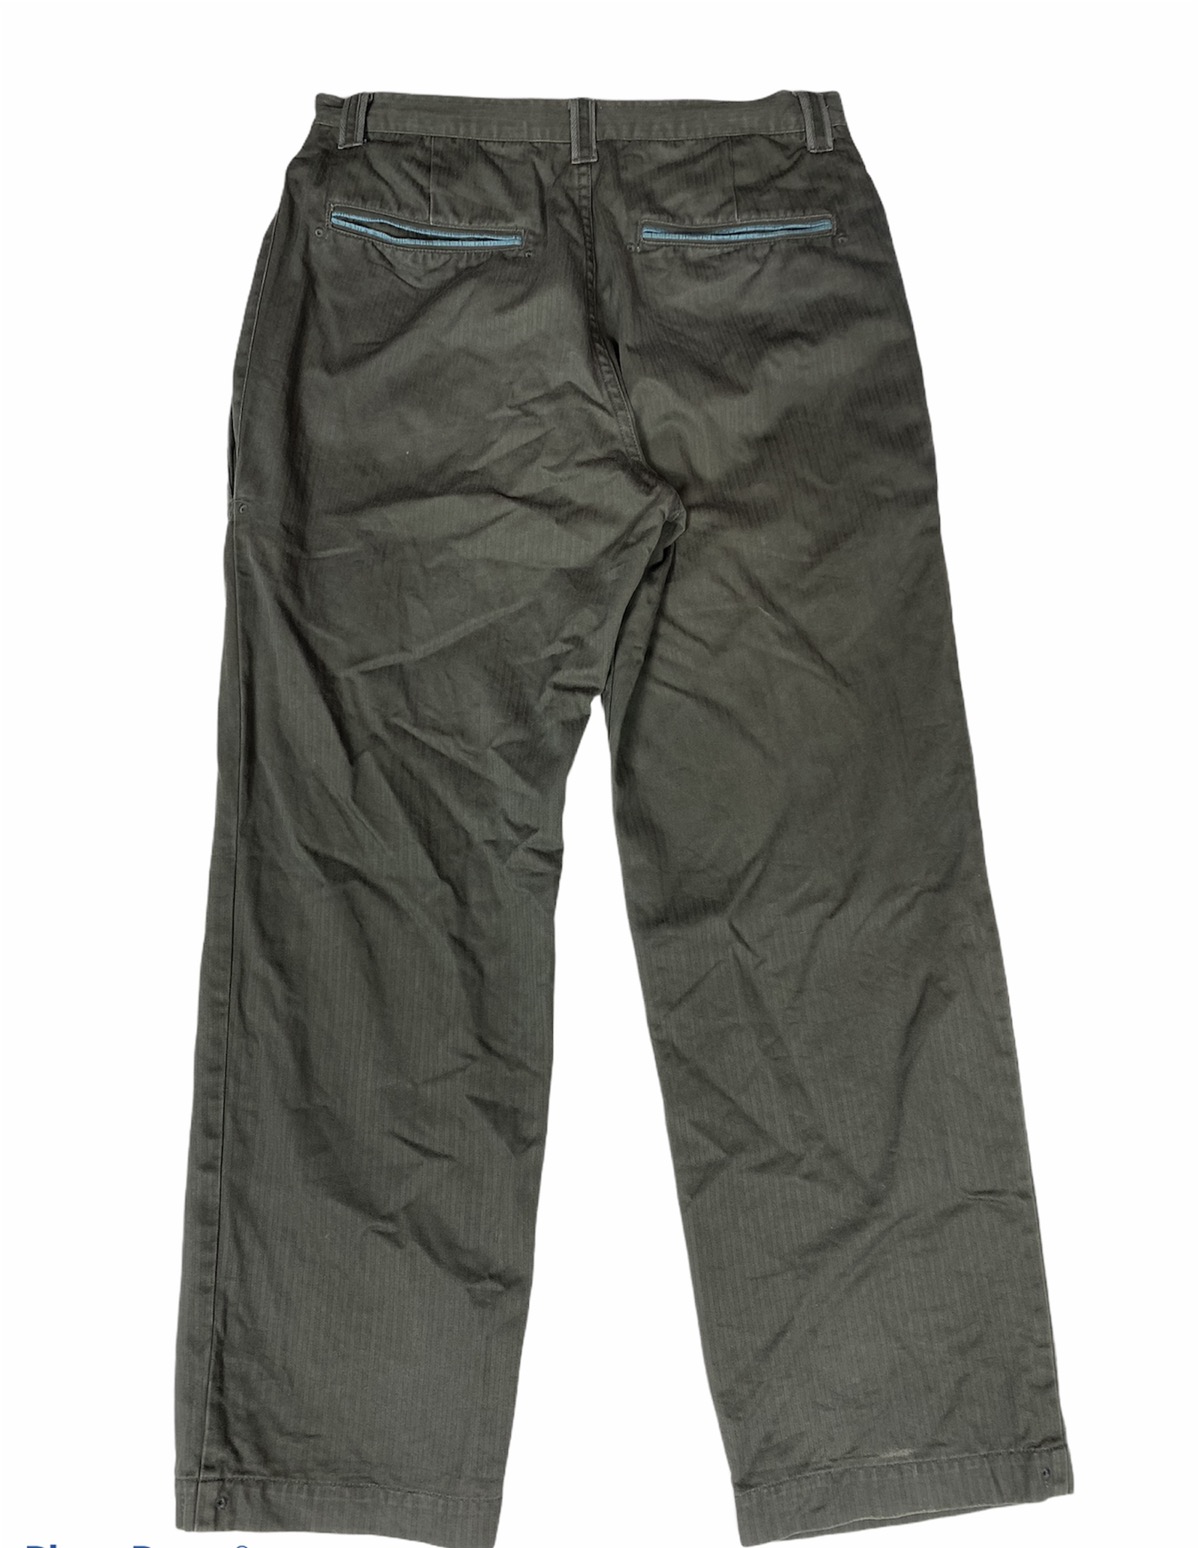 Japanese Brand - Mad Hectic Trousers Pants. S0150 - 2